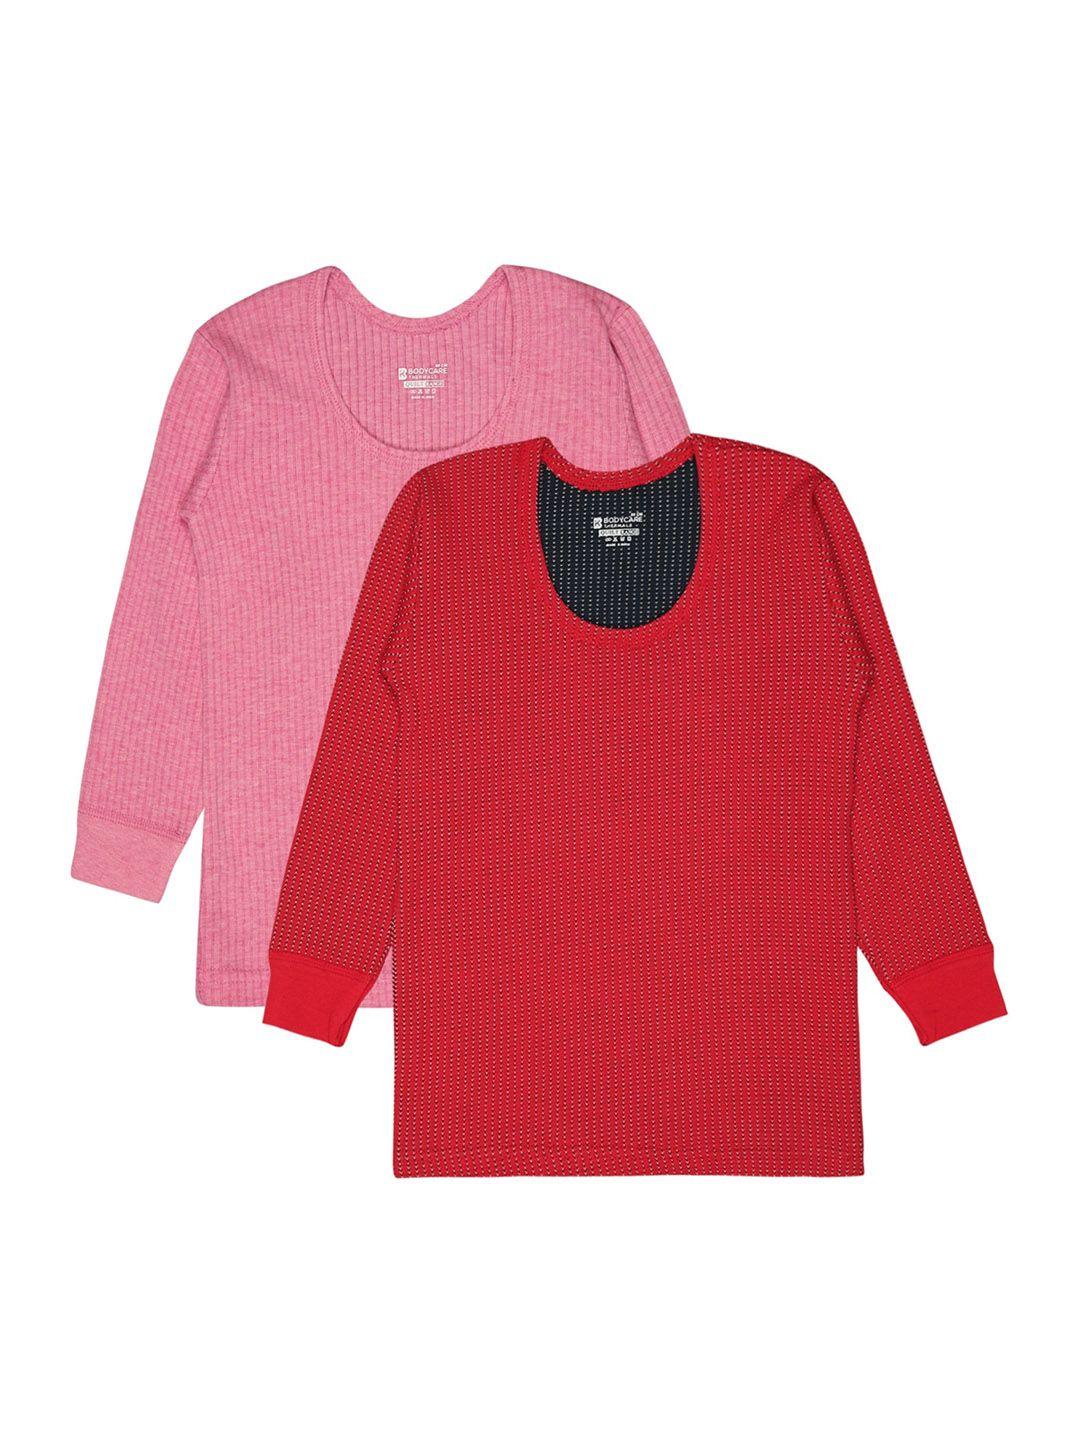 bodycare insider kids pack of 2 thermal tops